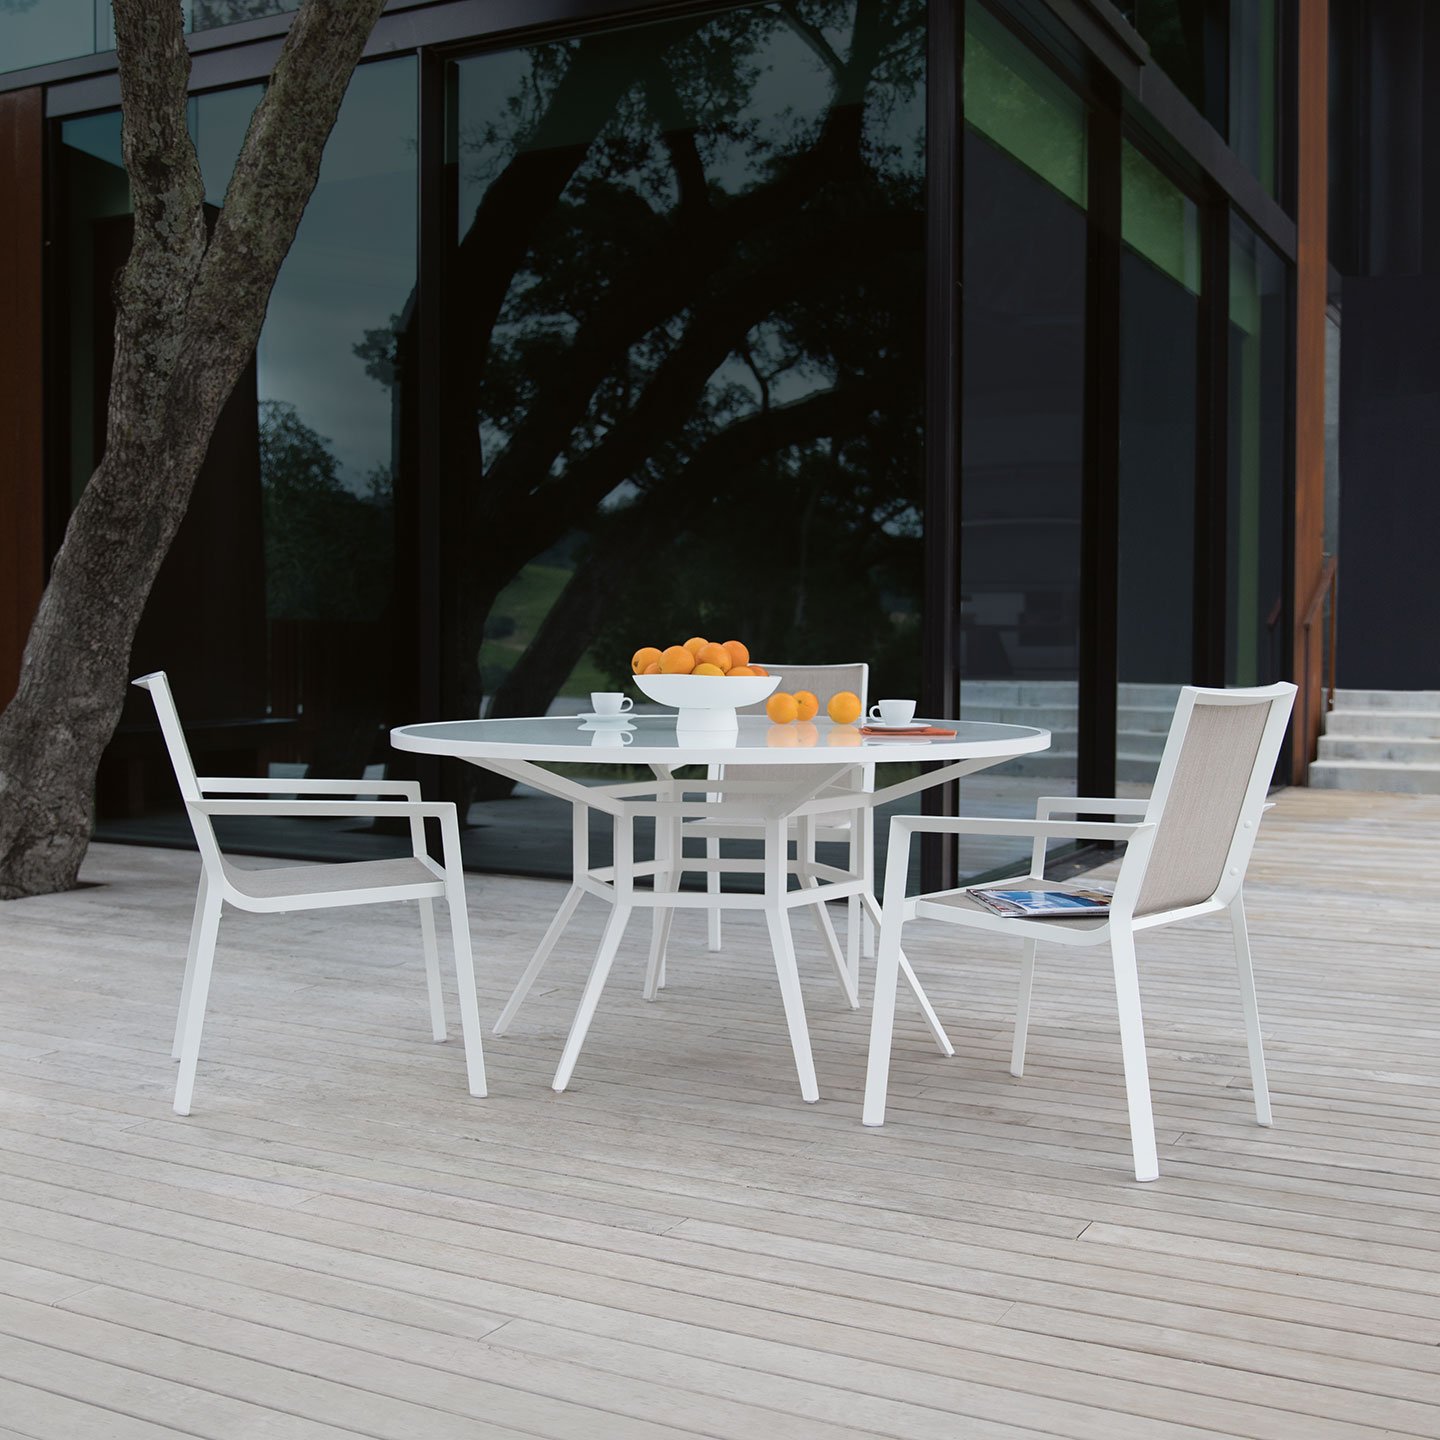 Haworth Slant Table with white top and white legs in outdoor patio area with fruit centerpiece